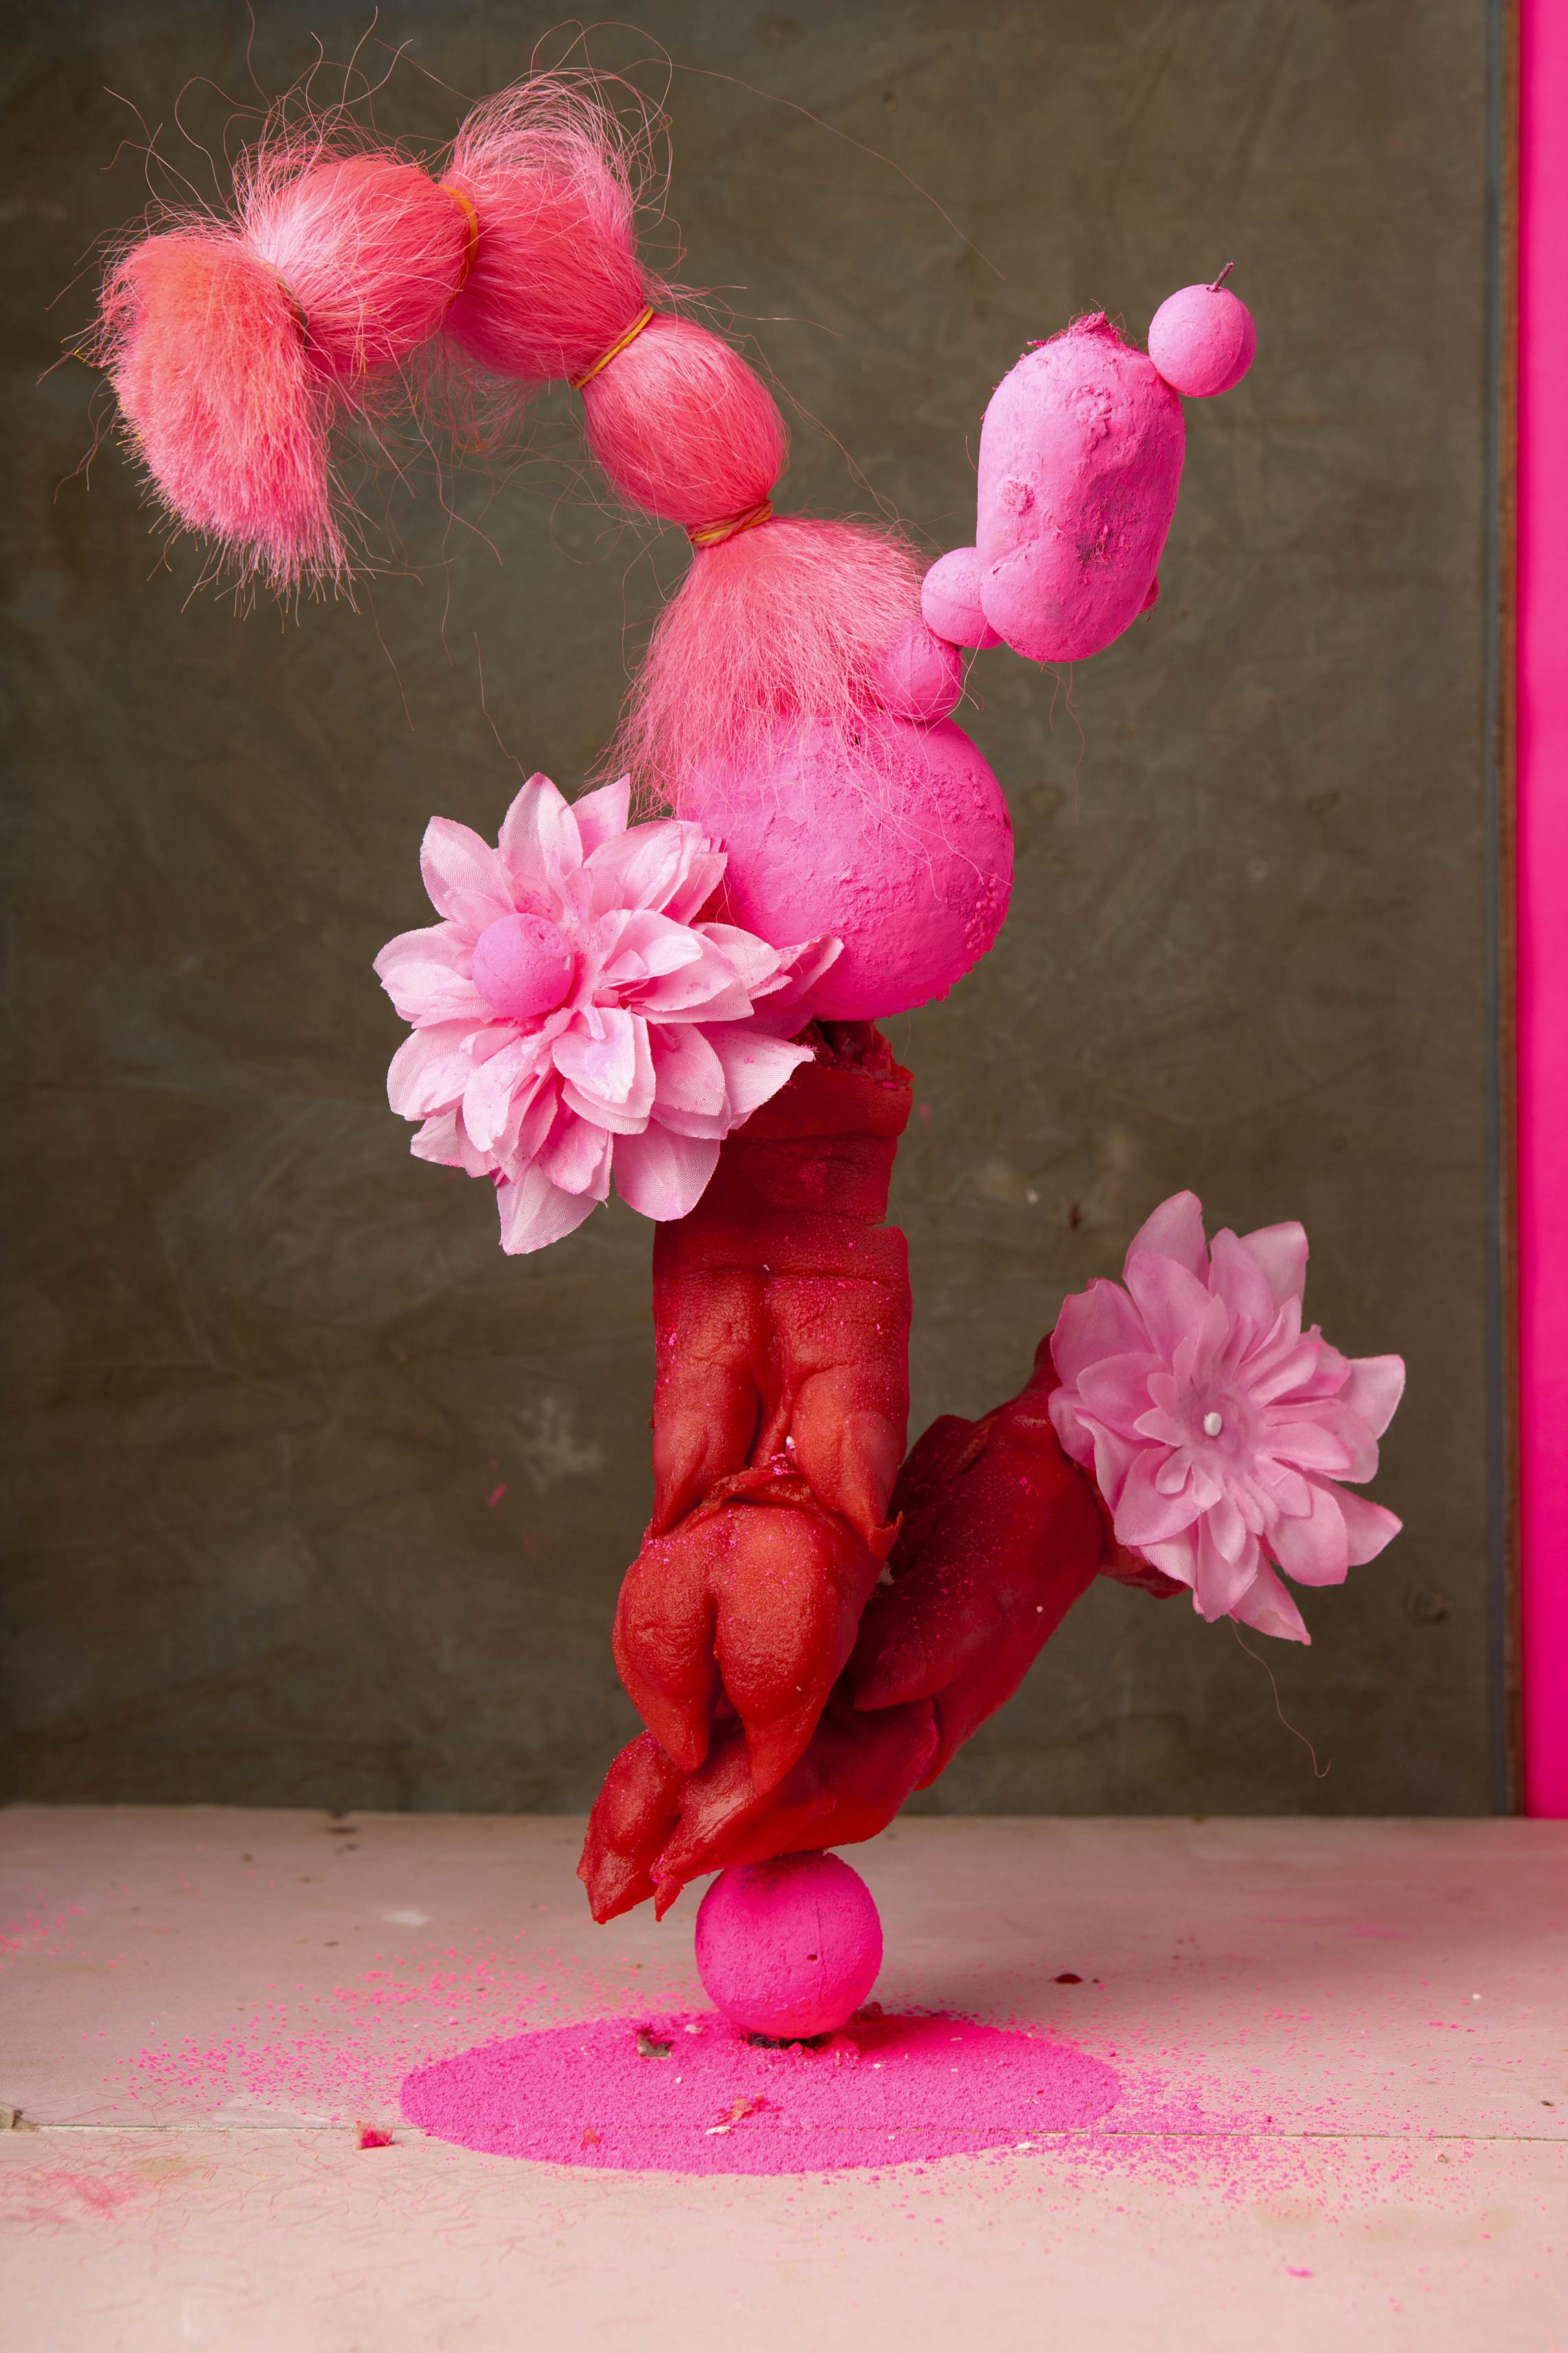 Pink #1, from the series A Dalston Anatomy, 2013 © Lorenzo Vitturi, courtesy of the Foam Collection